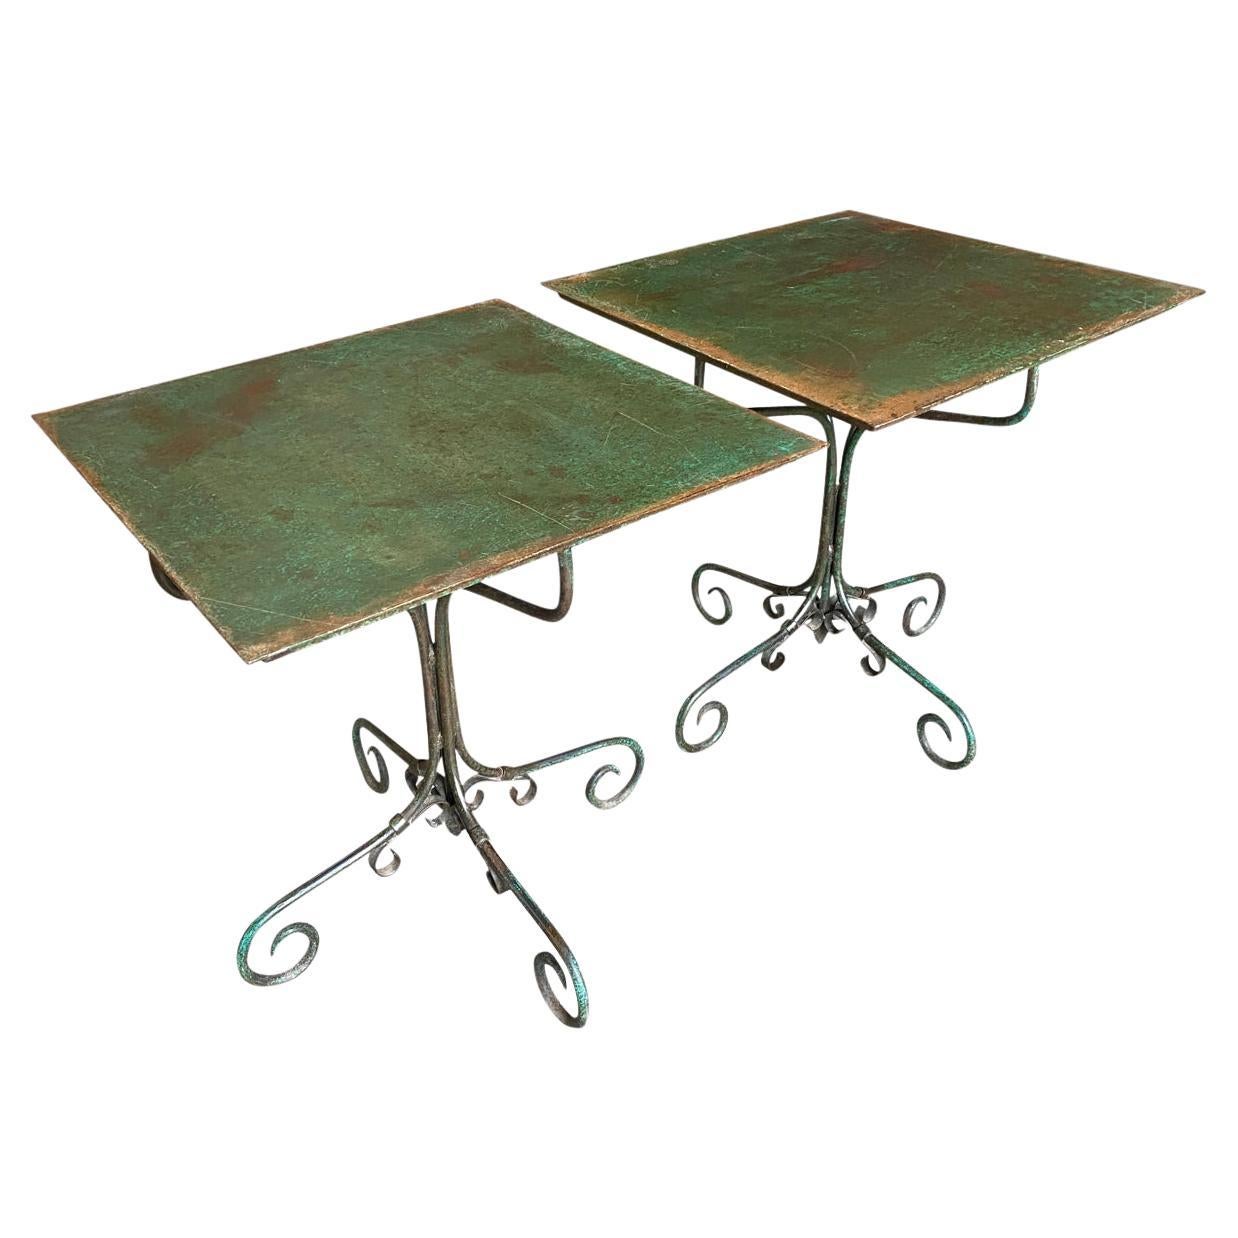 Pair of 19th Century French Garden Tables